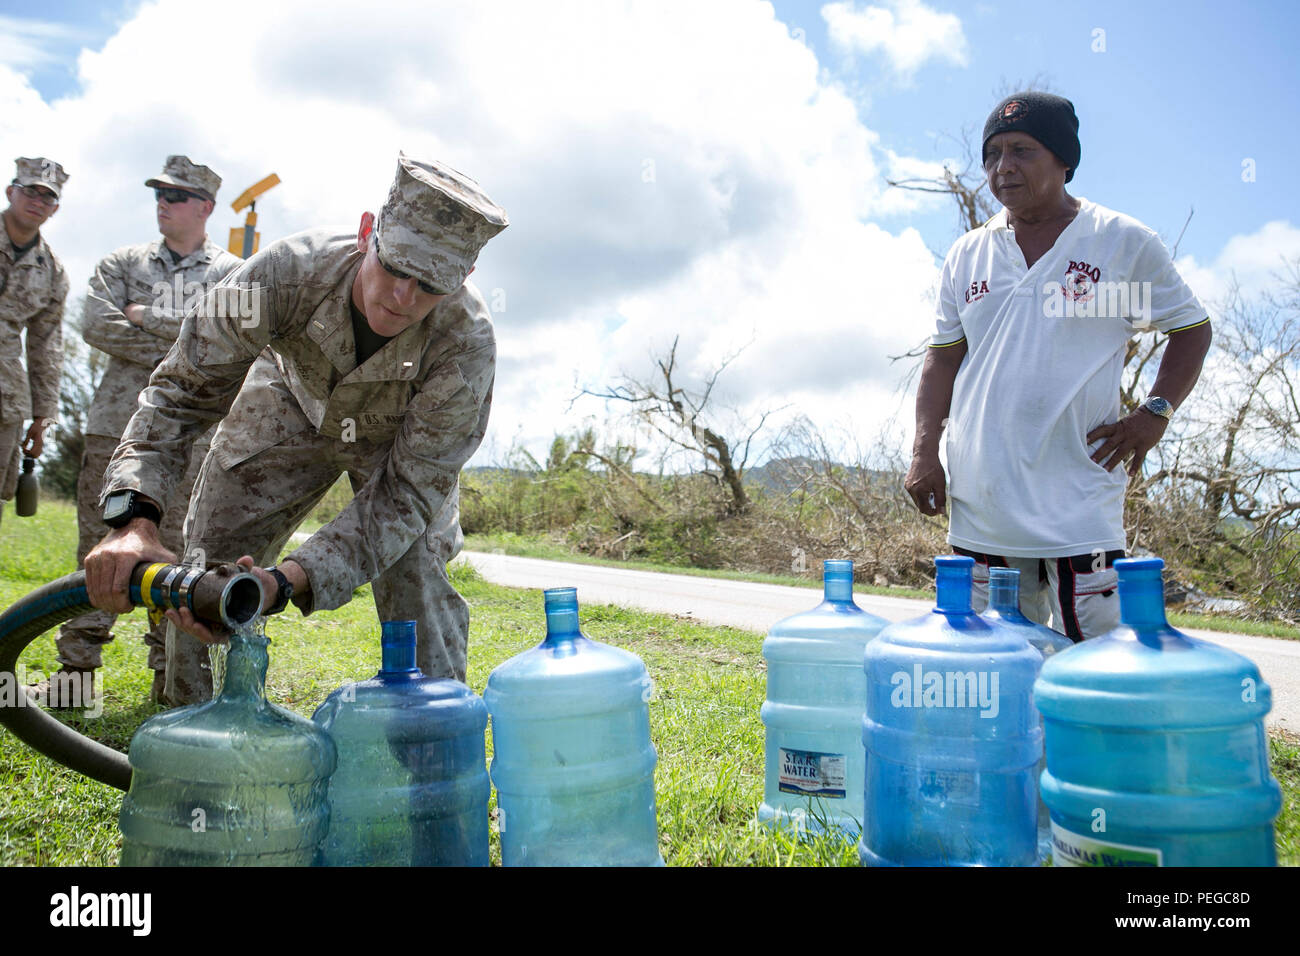 U.S. Marine 1st Lt. William Tidd, with Combat Logistics Battalion 31, 31st Marine Expeditionary Unit, distributes water to local civilians as part of typhoon relief efforts in Saipan, Aug. 11, 2015. The 31st MEU and the ships of the Bonhomme Richard Amphibious Ready Group are assisting the Federal Emergency Management Agency with distributing emergency relief supplies to Saipan after the island was struck by Typhoon Soudelor, Aug. 2-3. (U.S. Marine Corps photo by Lance Cpl. Brian Bekkala/Released.) Stock Photo